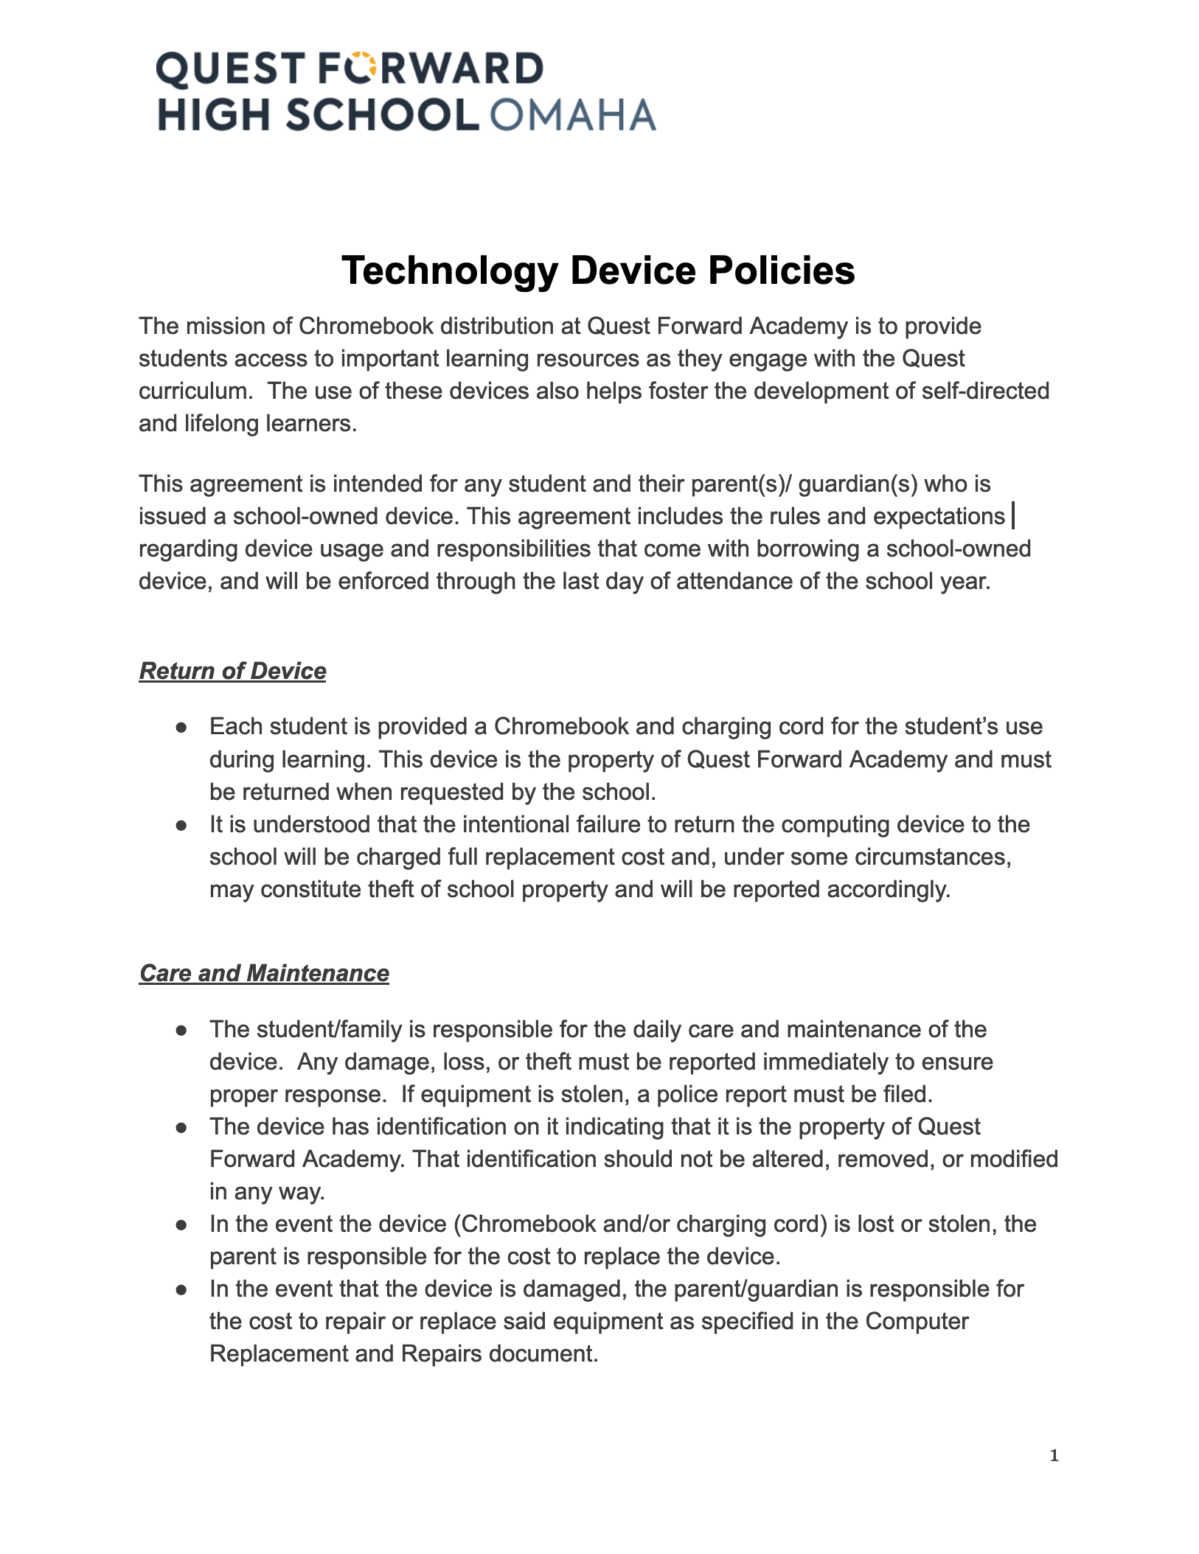 Technology Device Policies